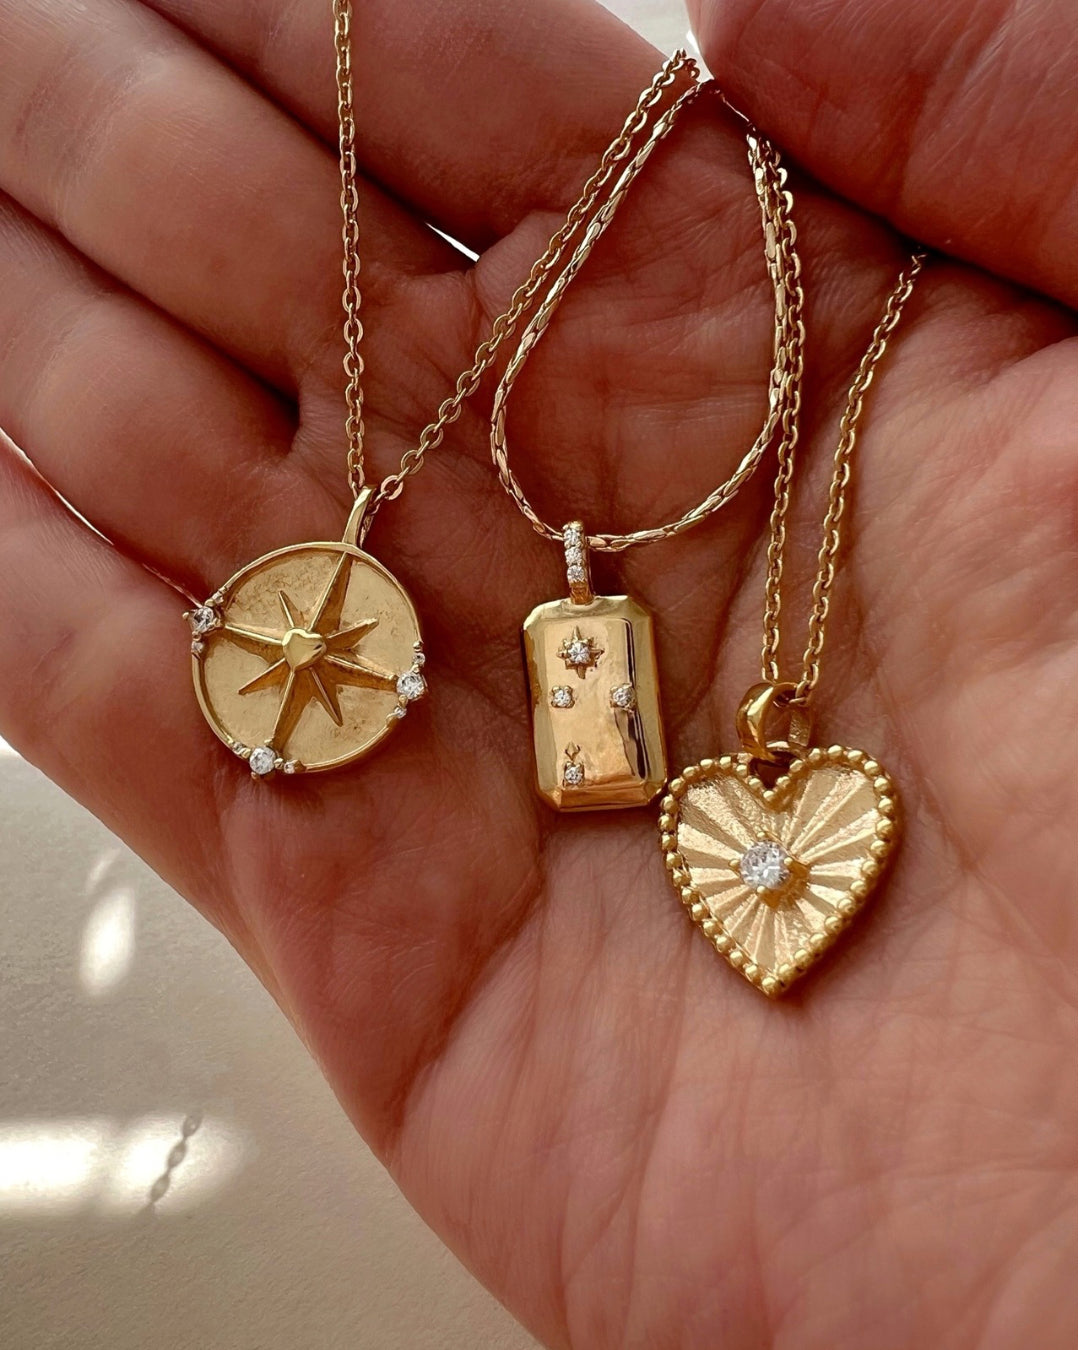 Gold filled yellow gold necklace chain with heart token pendant and dreamers pendant. 